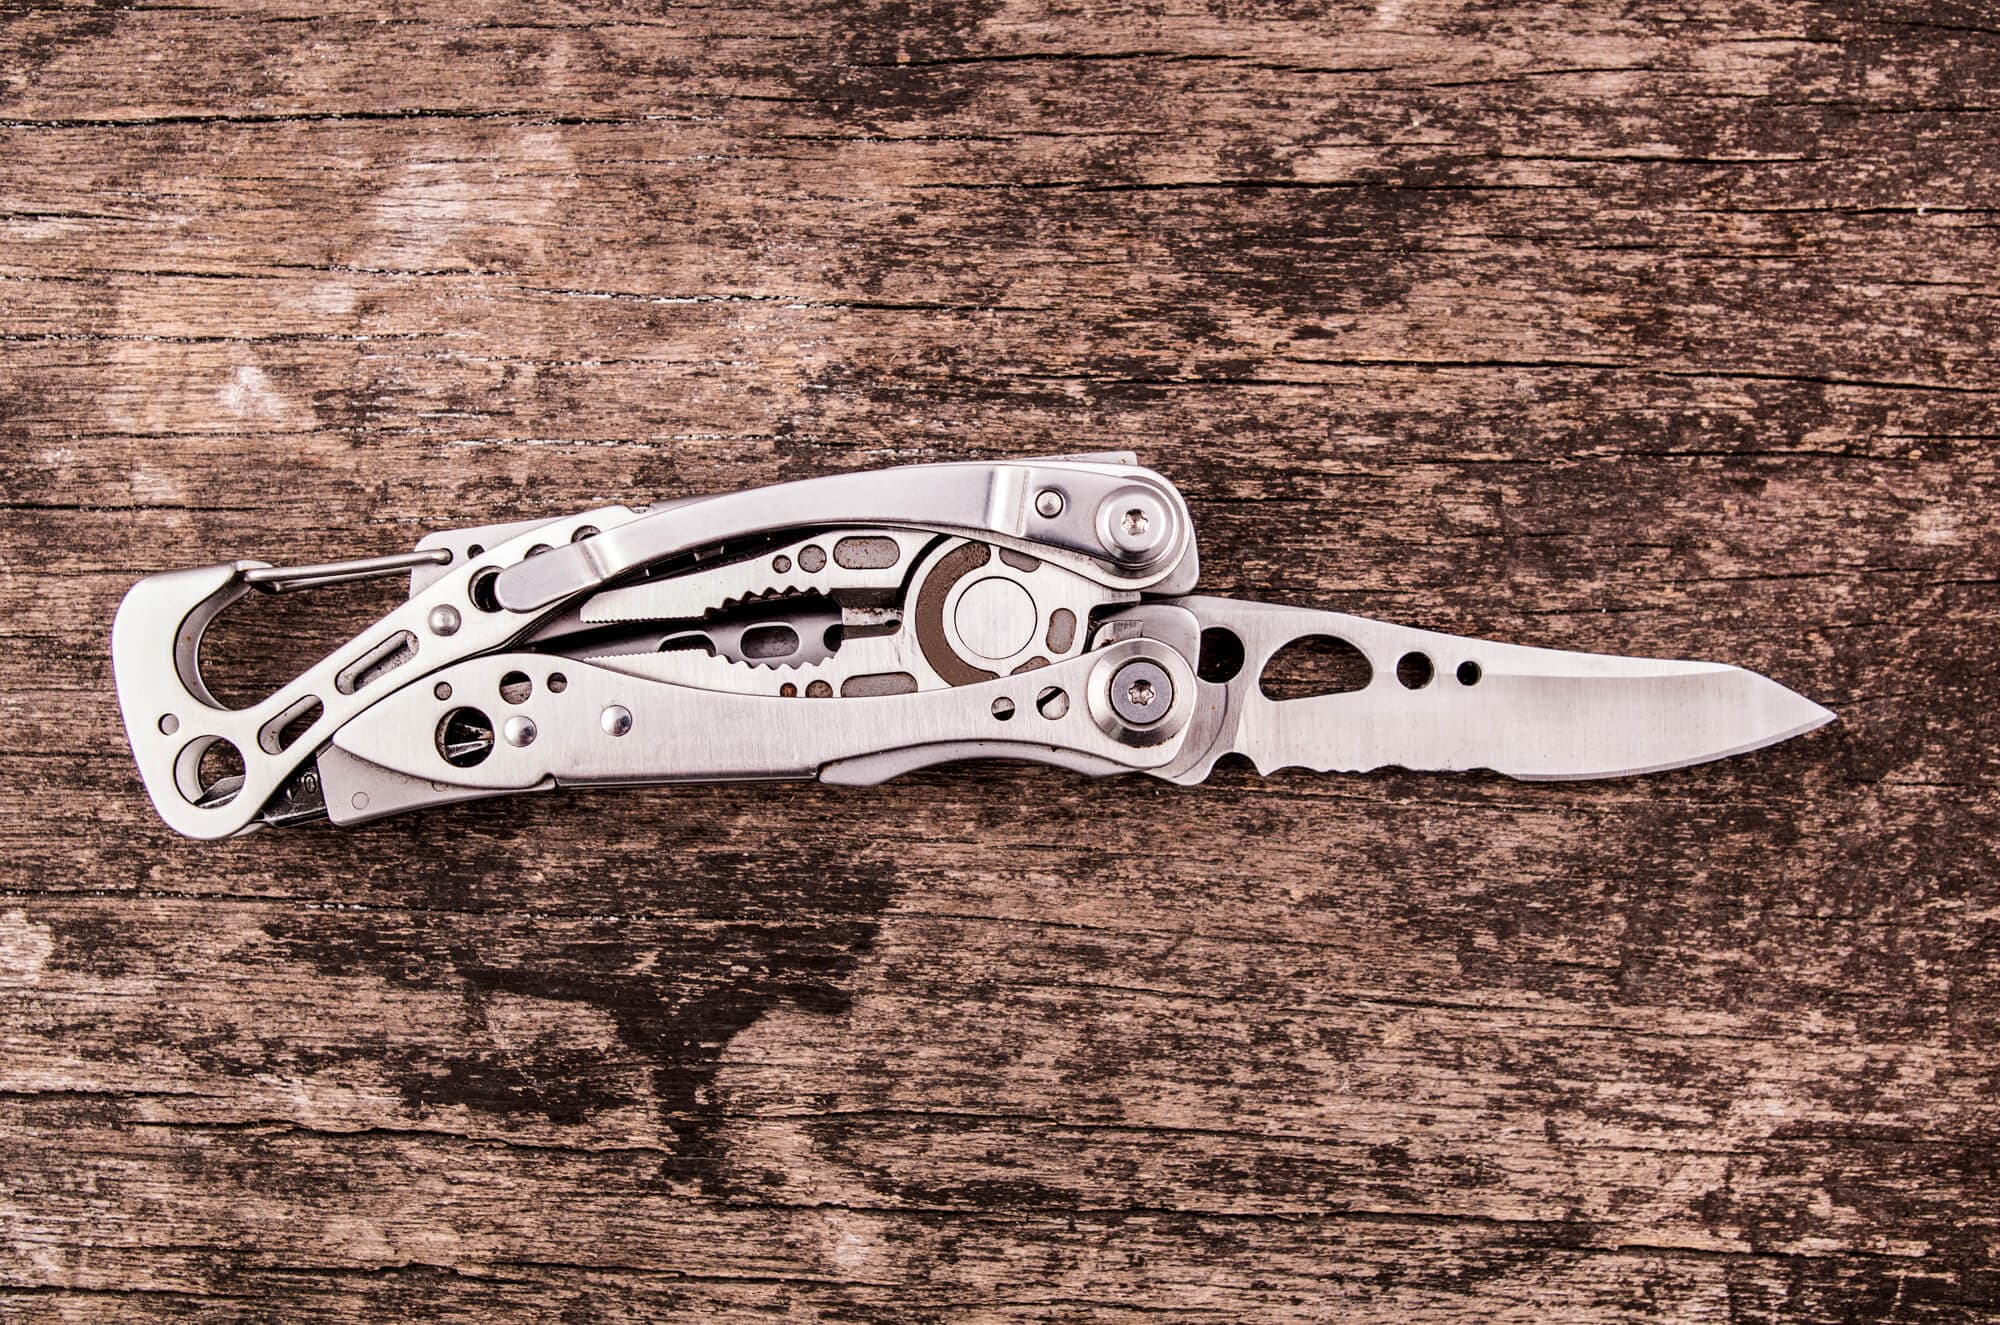 Best Backpacking Multi-Tools: Be Prepared on Your Journey